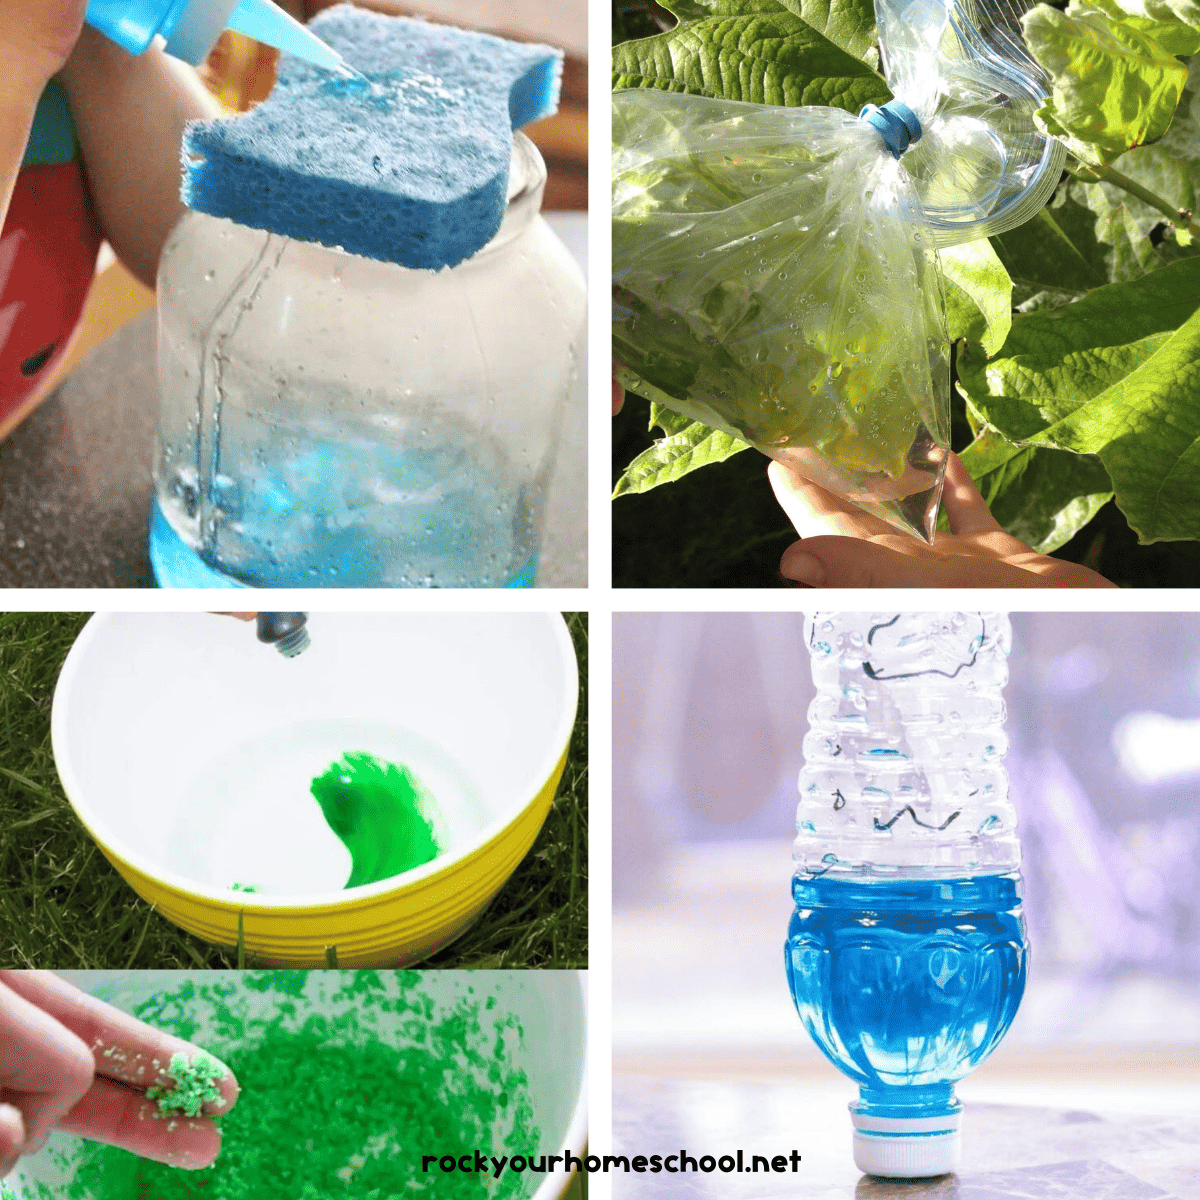 Four examples of water cycle activities for kids with glass jar and sponge with blue water, plastic bag on leaf, green food coloring and salt, and plastic water bottle with blue water.